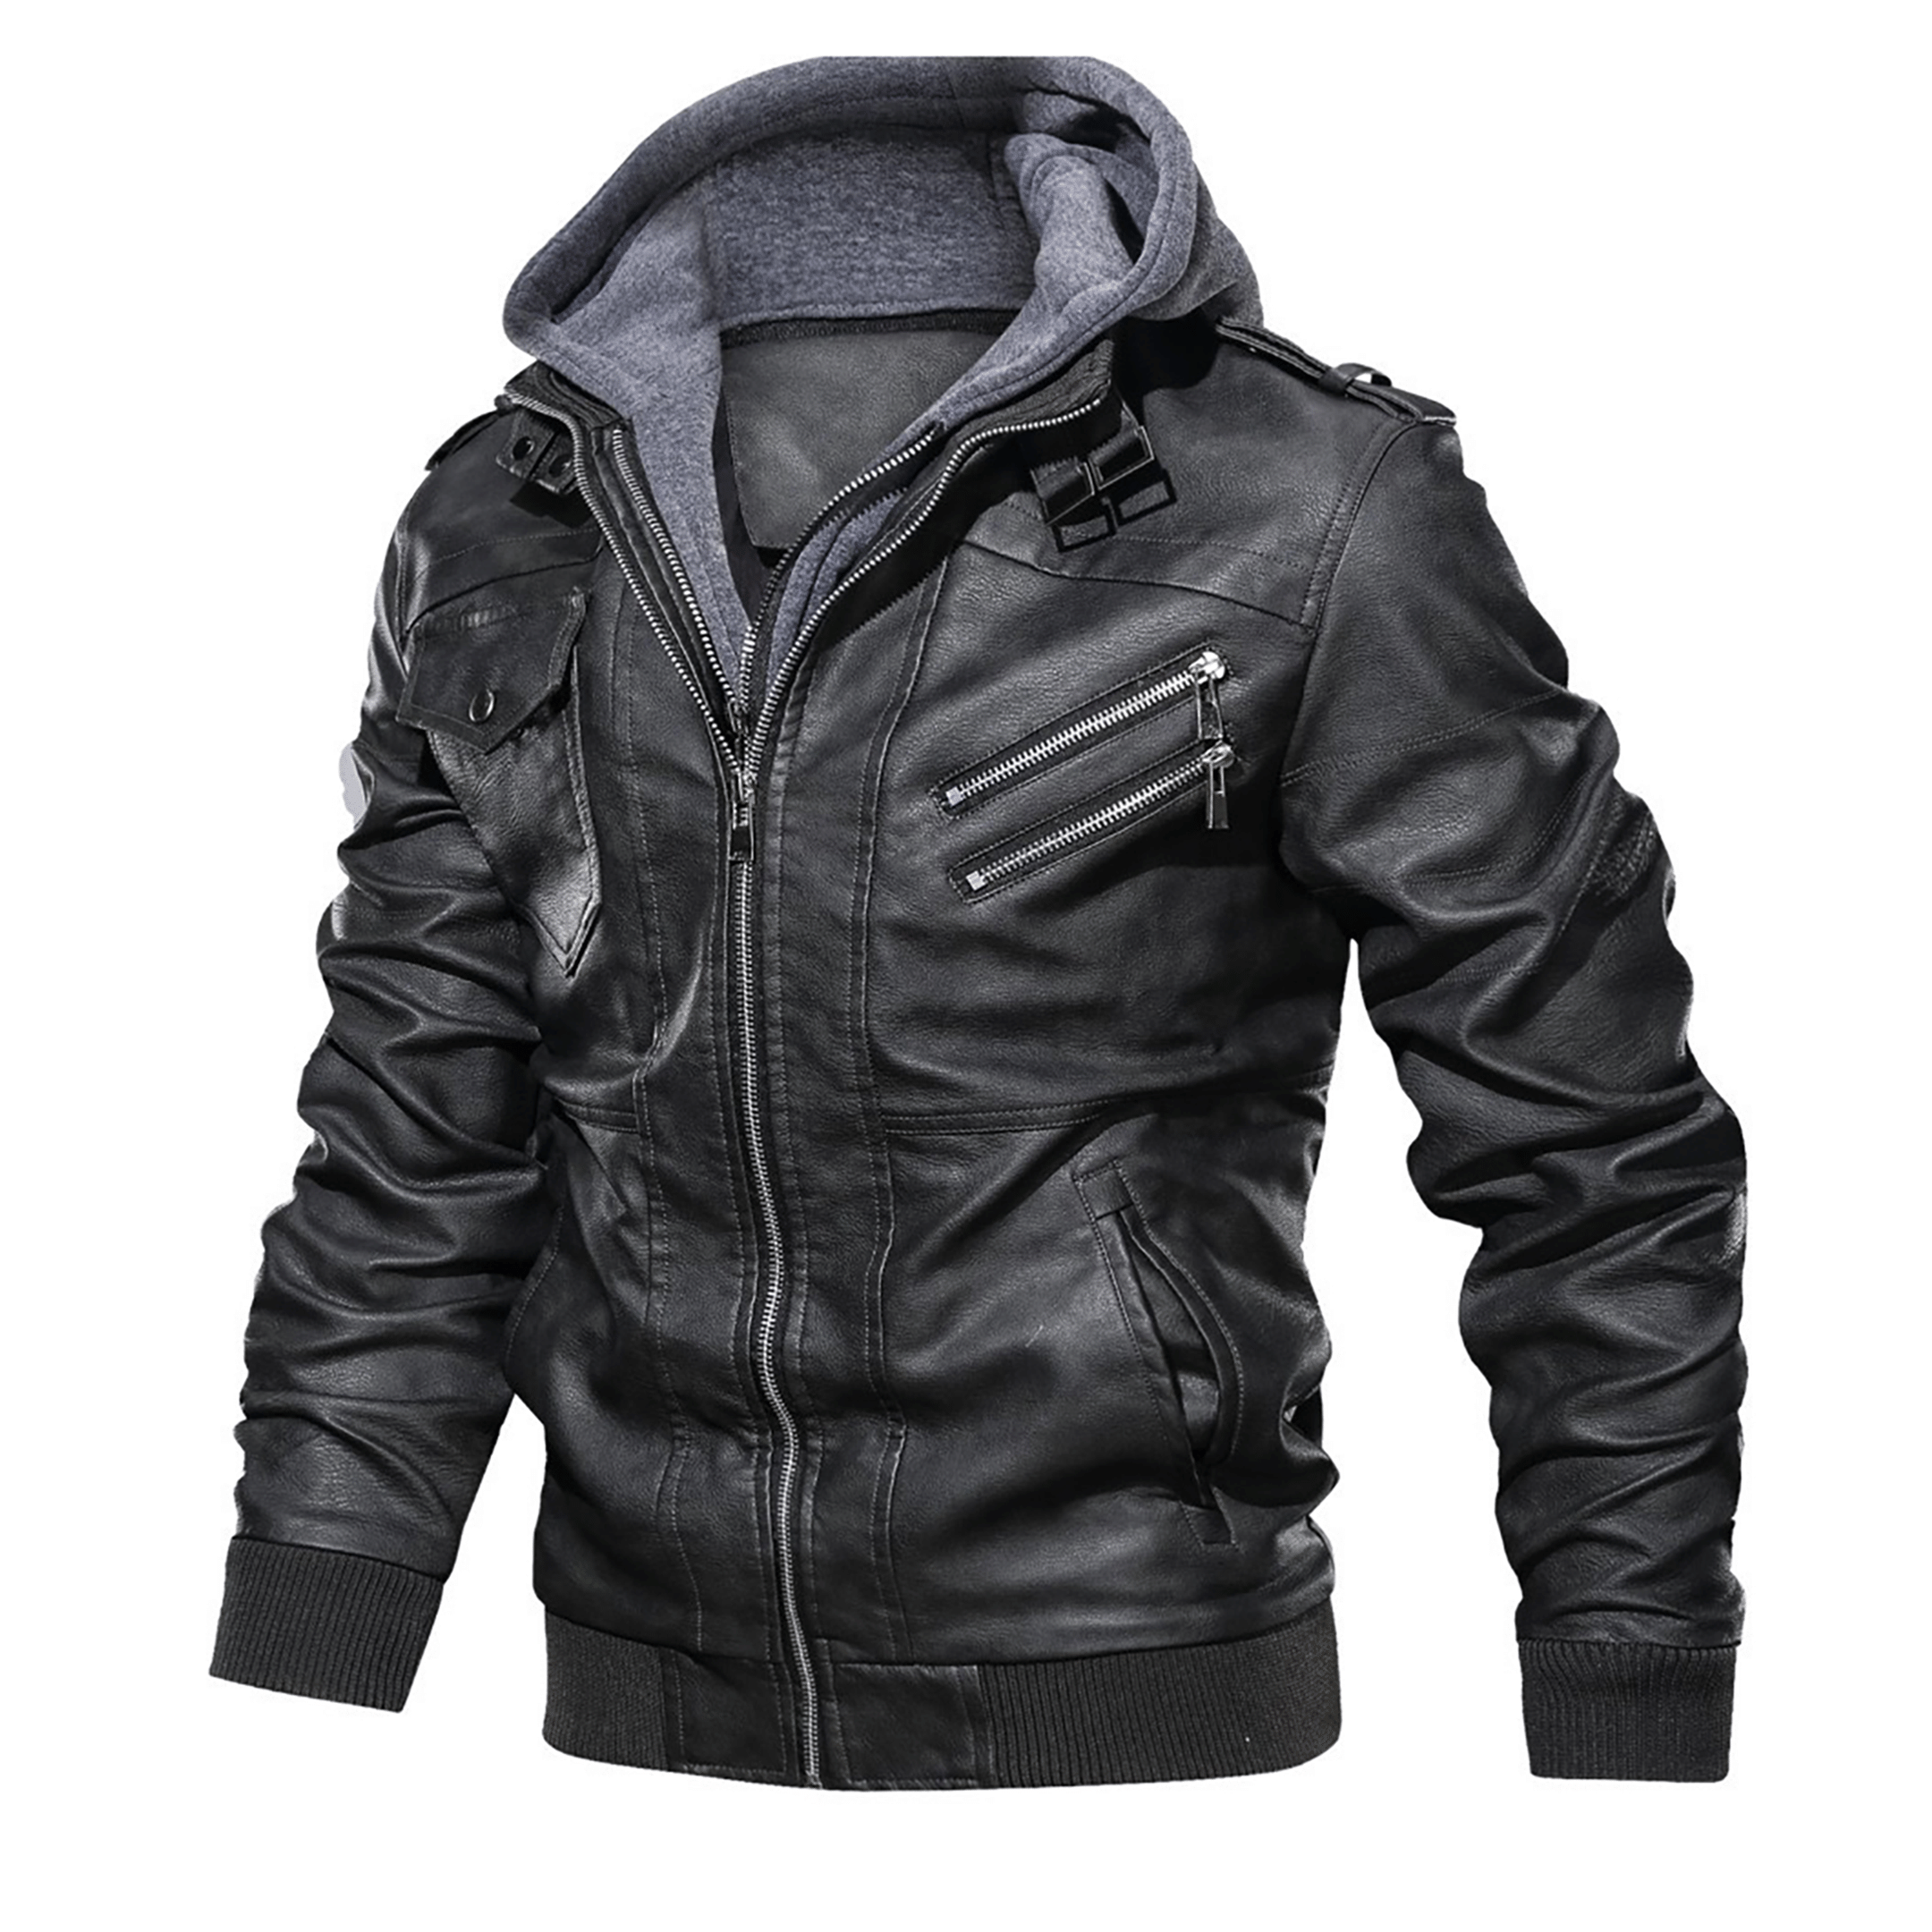 Top leather jackets and latest products 381